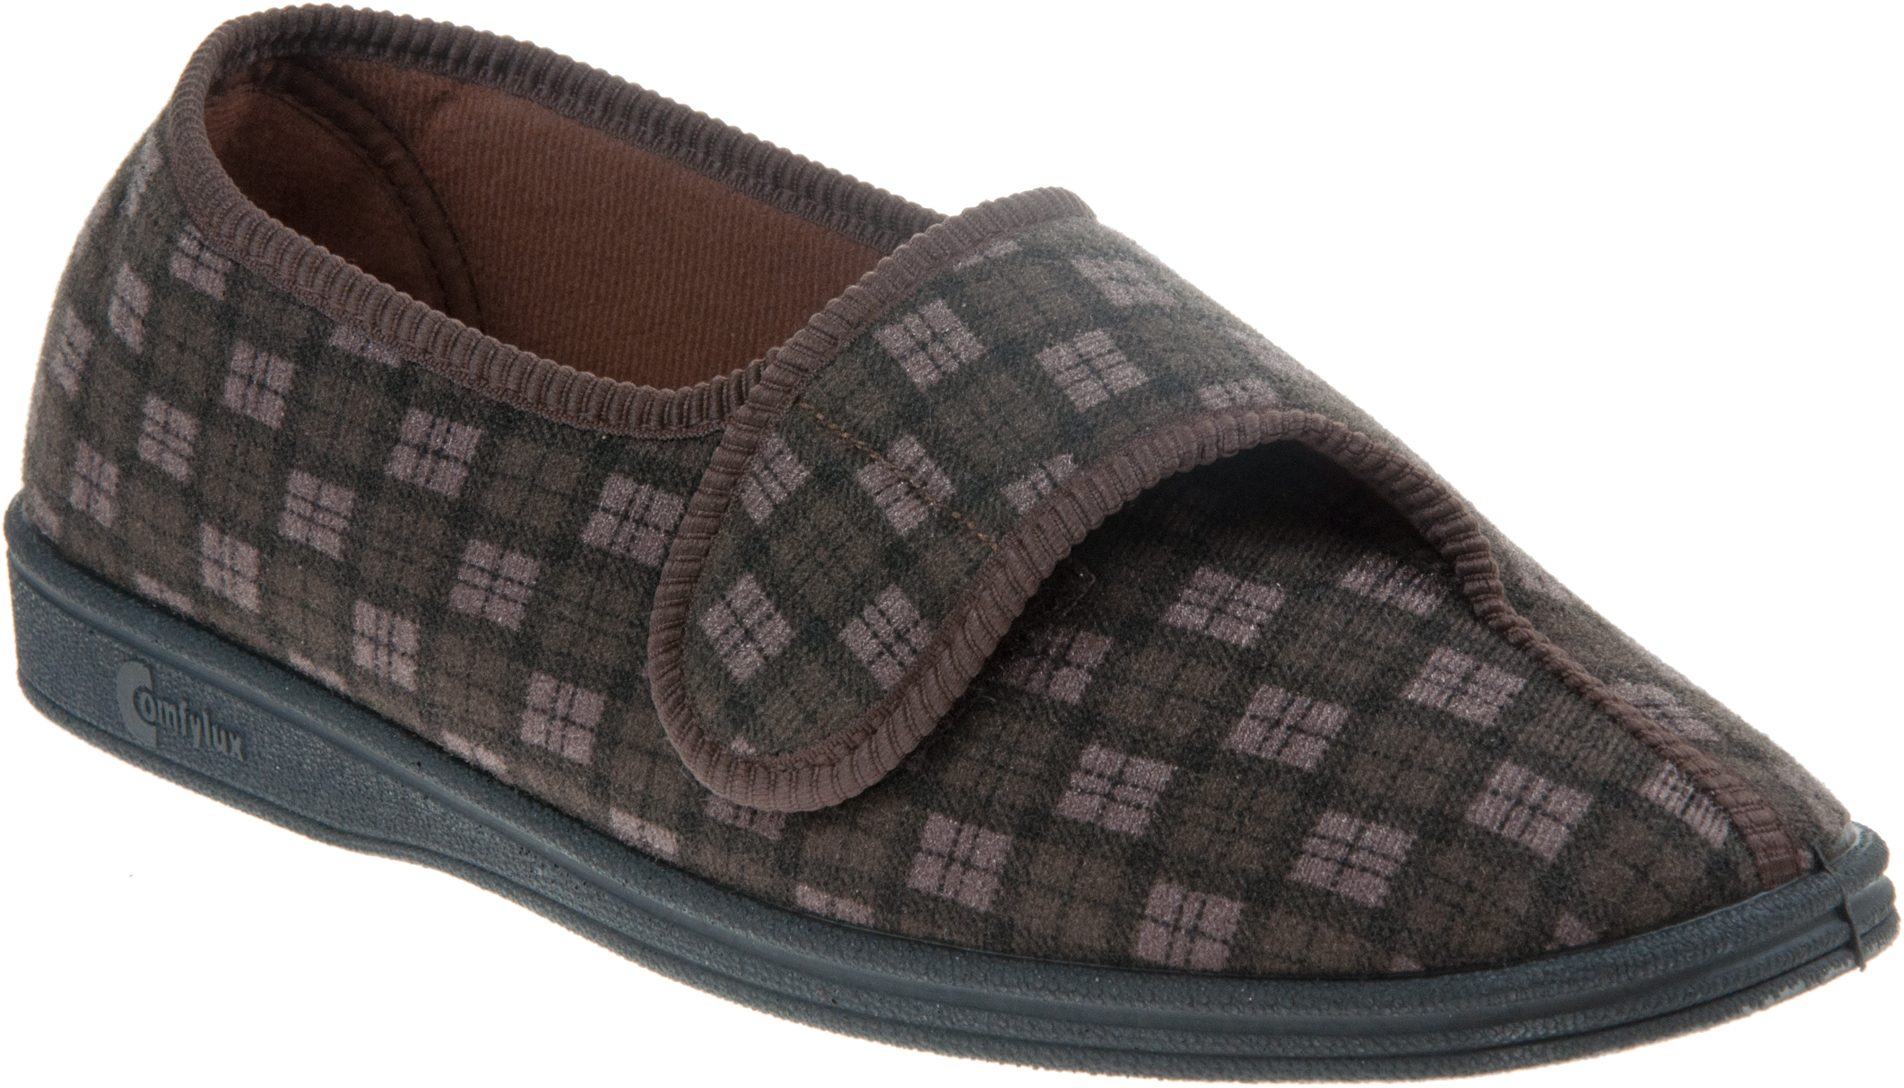 Comfylux Paul Dark Brown Check MS236B - Full Slippers - Humphries Shoes